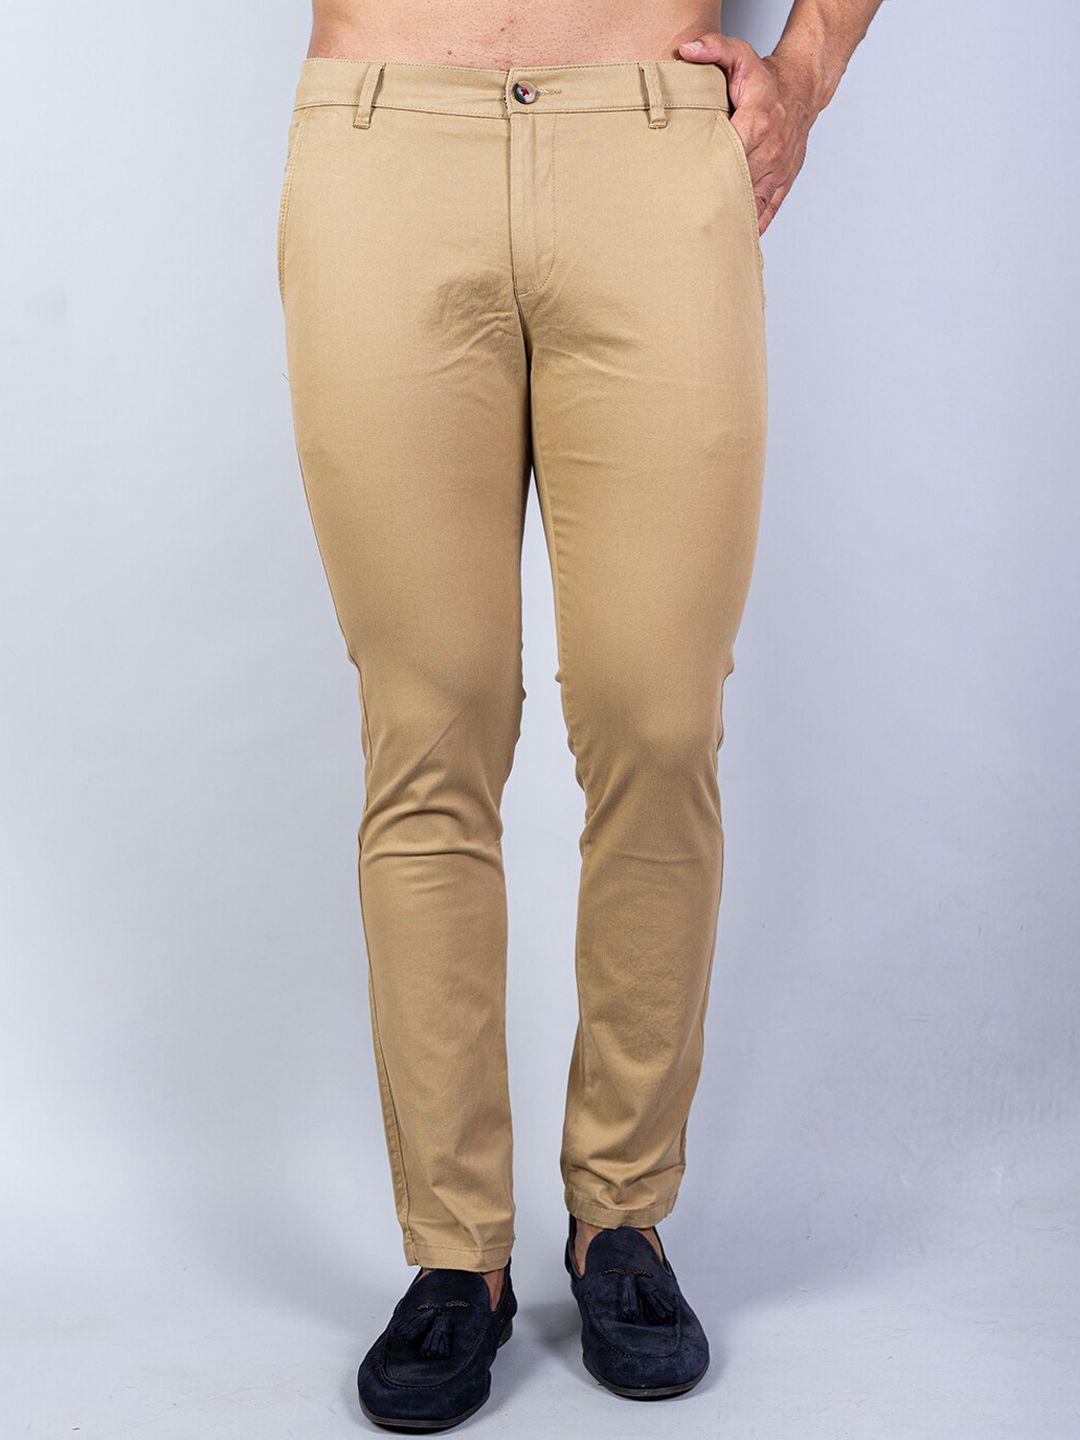 tistabene men khaki solid relaxed cotton chinos trouser